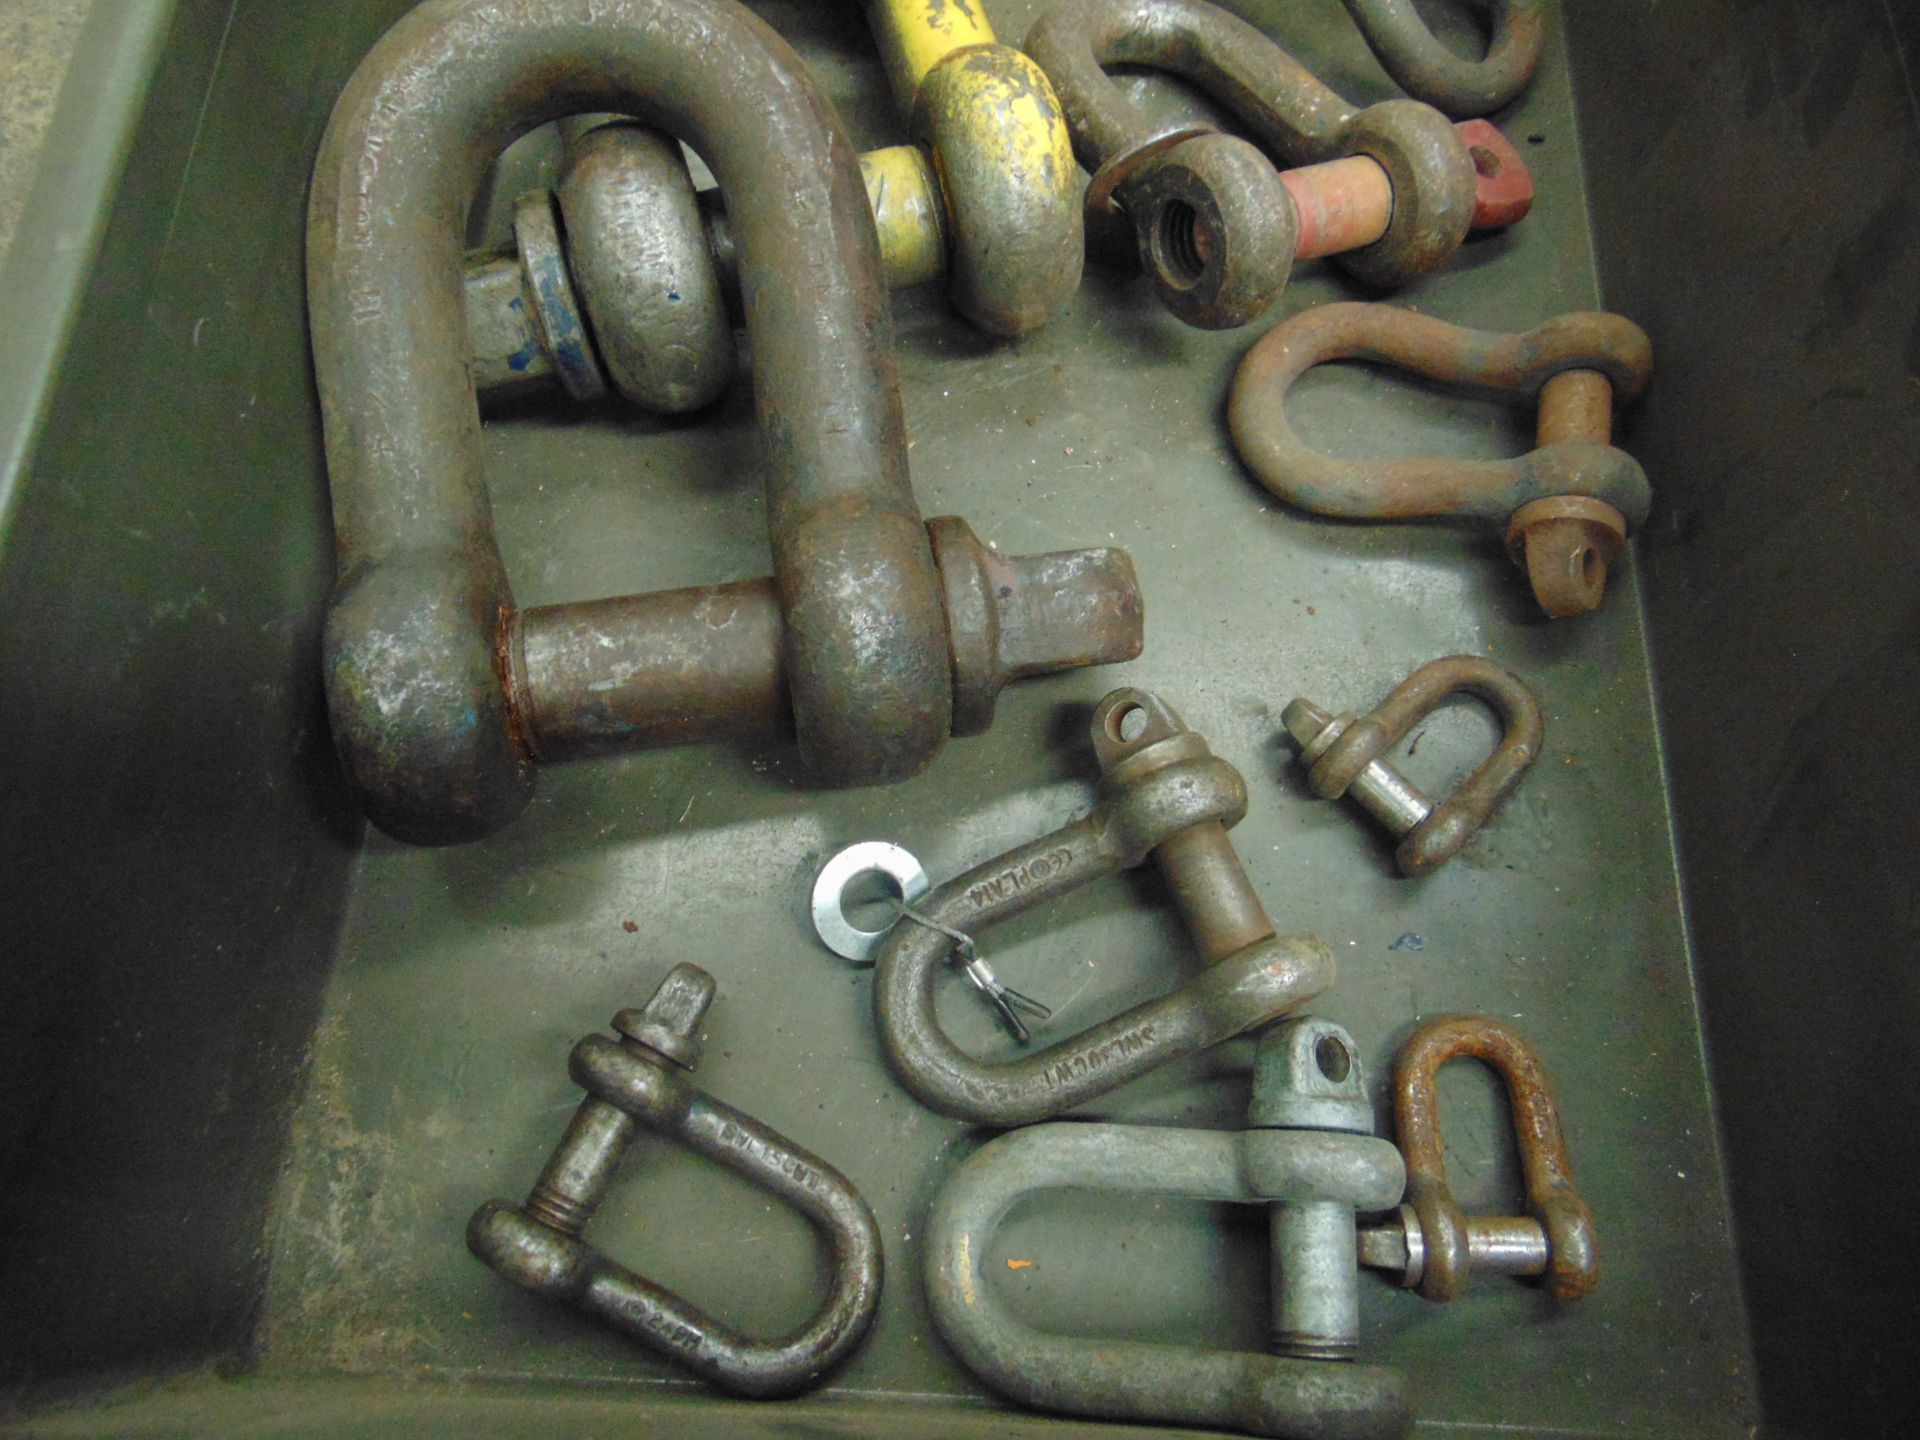 VARIOUS SHACKLES, STORAGE BOX INCLUDED - Image 3 of 3